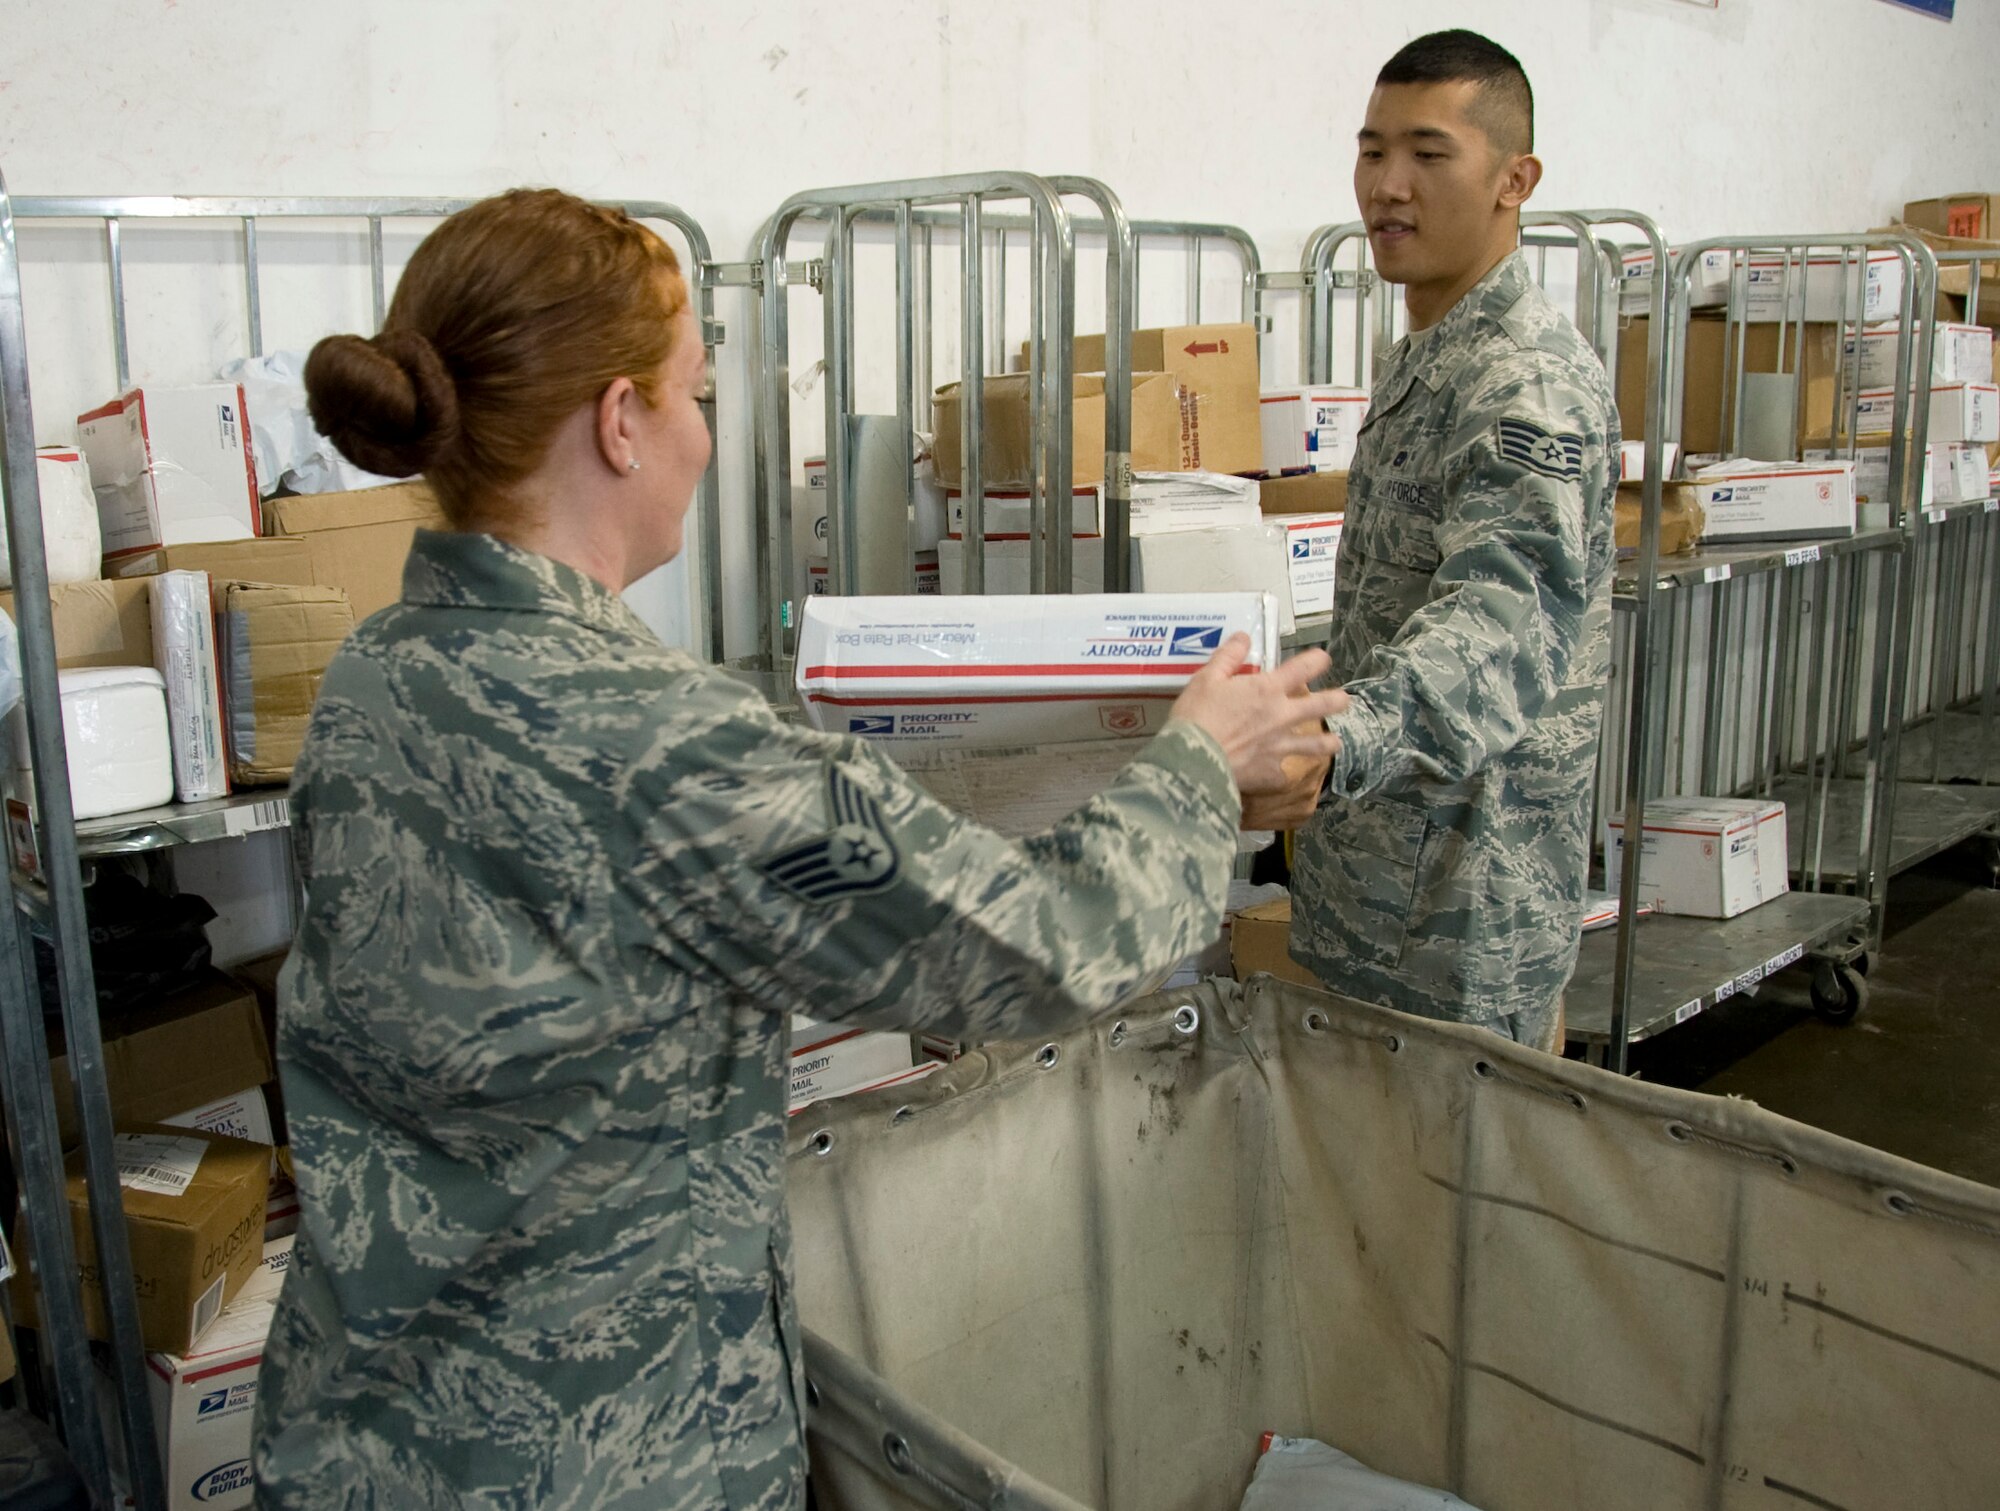 Staff Sgt. Melissa Spell (left) and Staff Sgt. Chang Kim, 379th ECS postal clerks, sort through delivered parcels to get them ready for pickup by the units here. The post office here provides postal service for 60 units and all branches of military. (U.S. Air Force photo/Senior Airman Bryan Swink) 